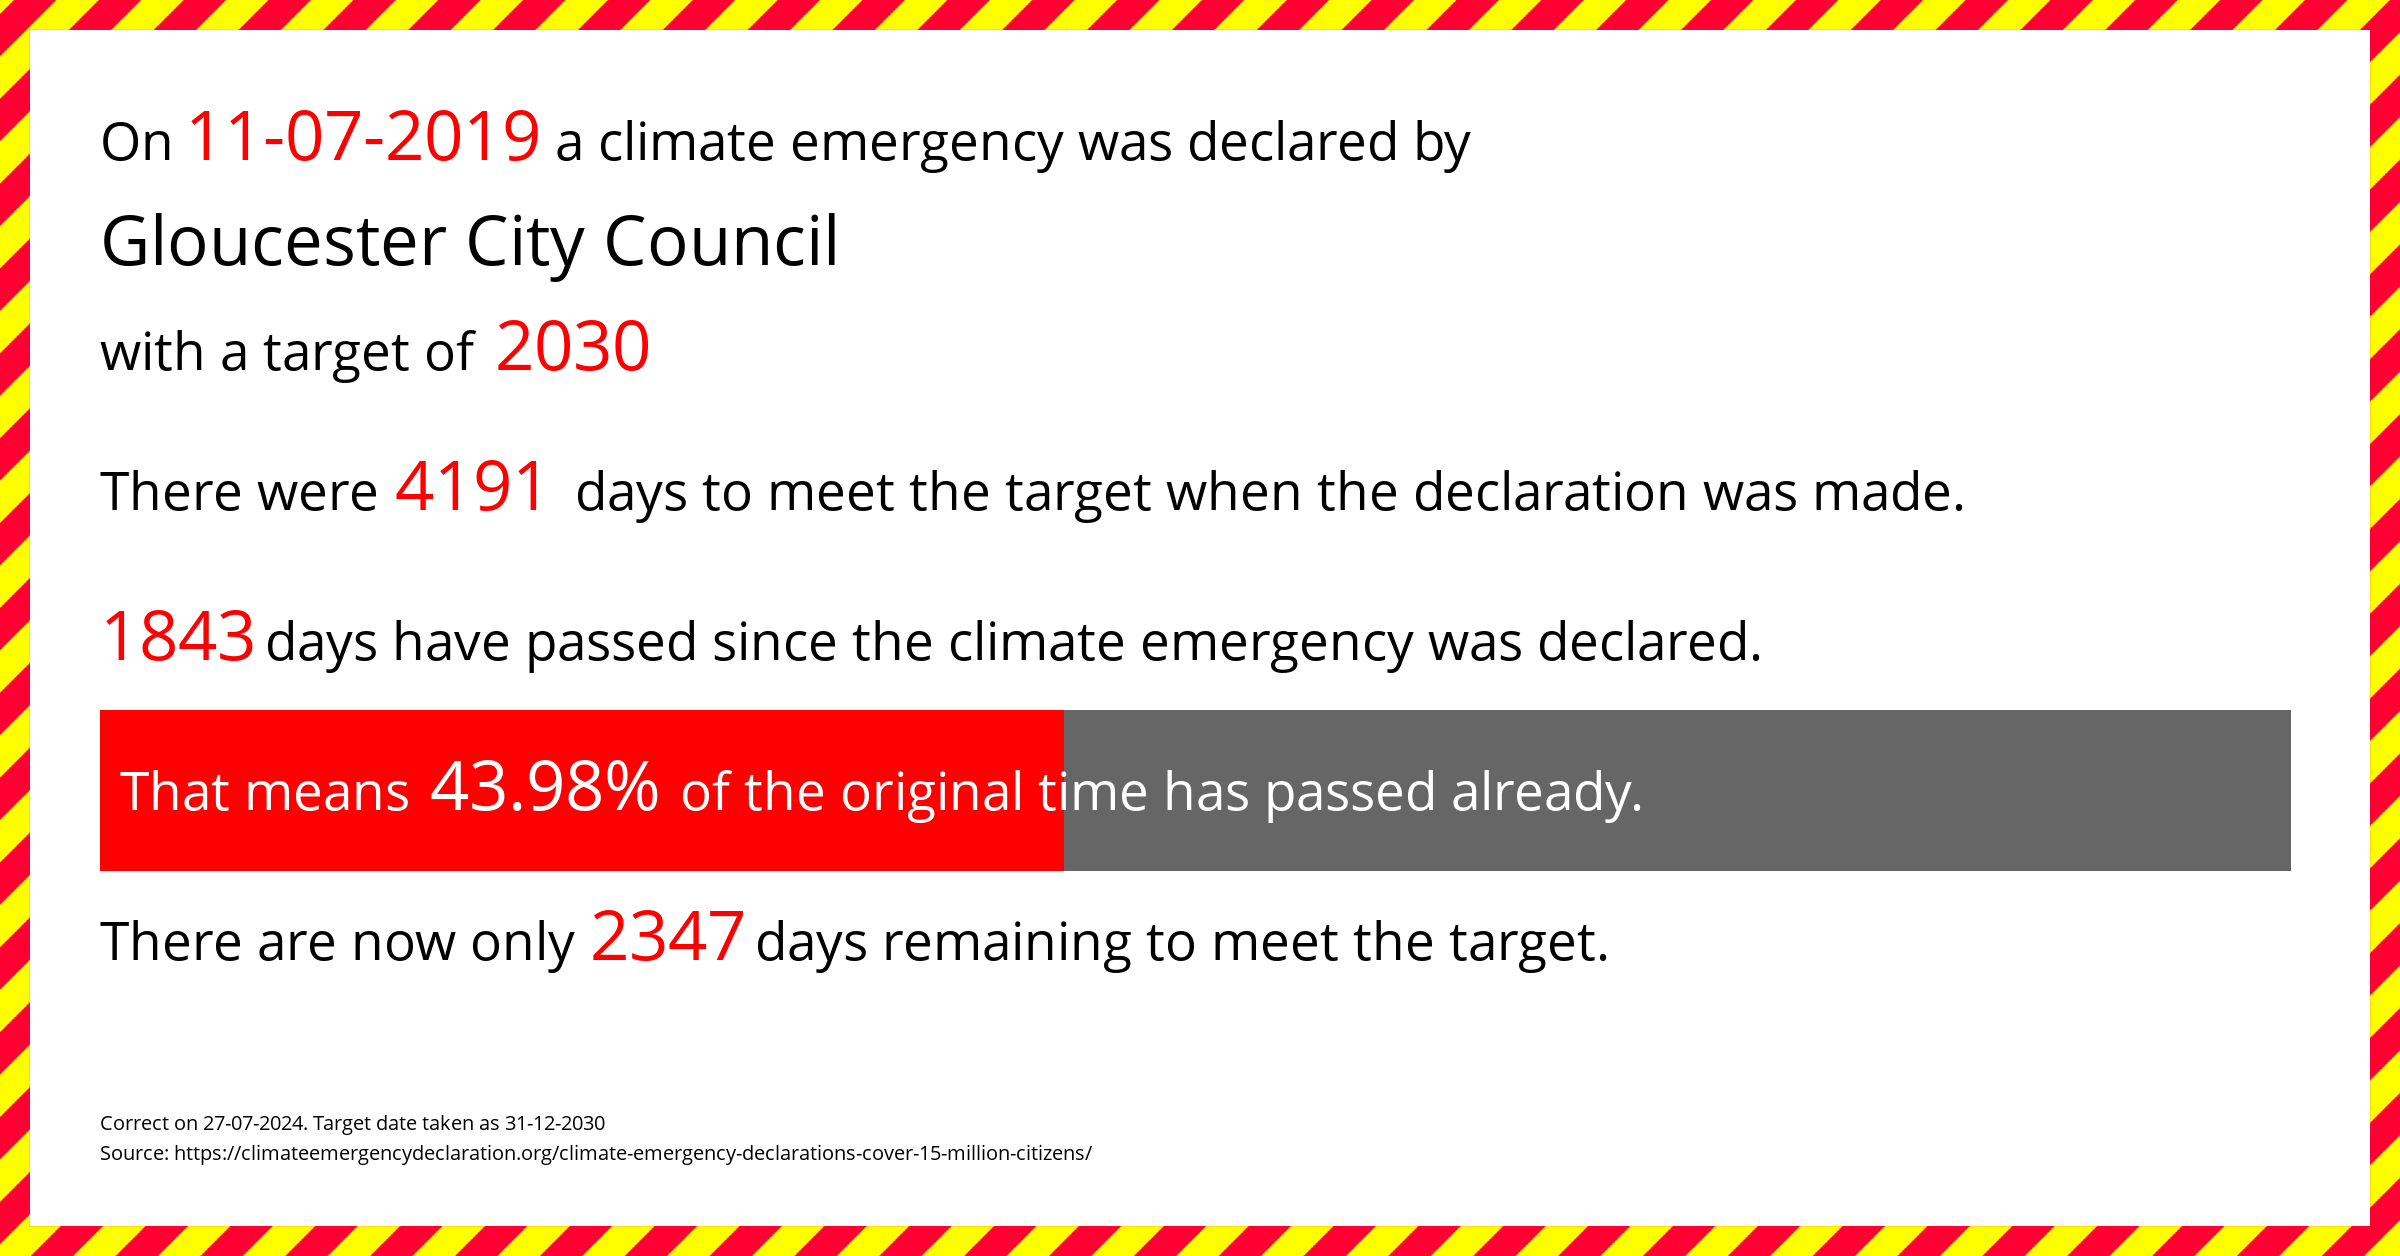 Gloucester City Council declared a Climate emergency on Thursday 11th July 2019, with a target of 2030.